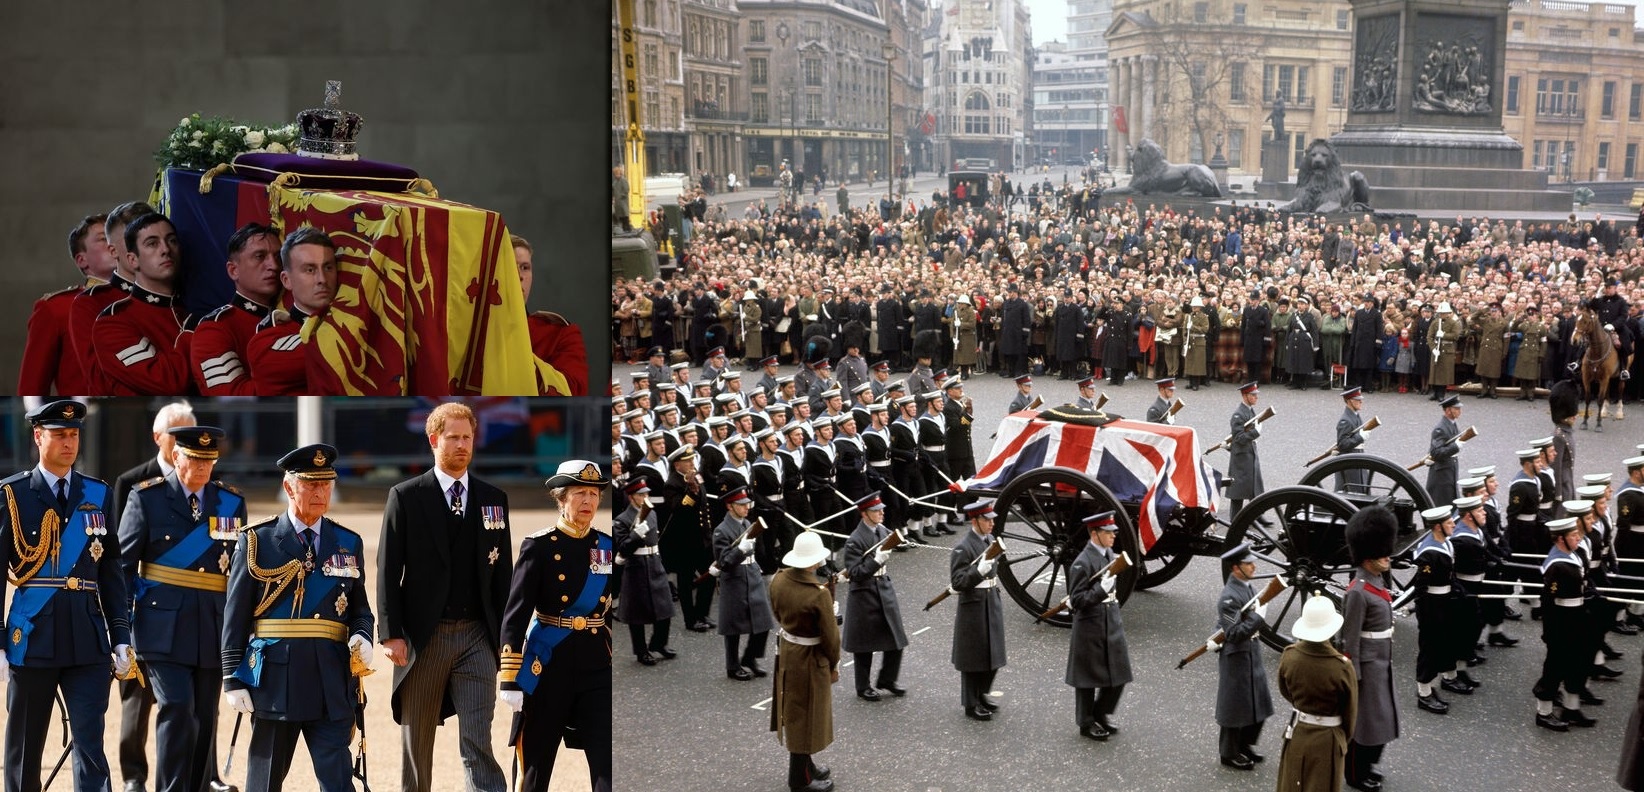 Queens funeral with 4 billion plus viewers became most watched broadcast